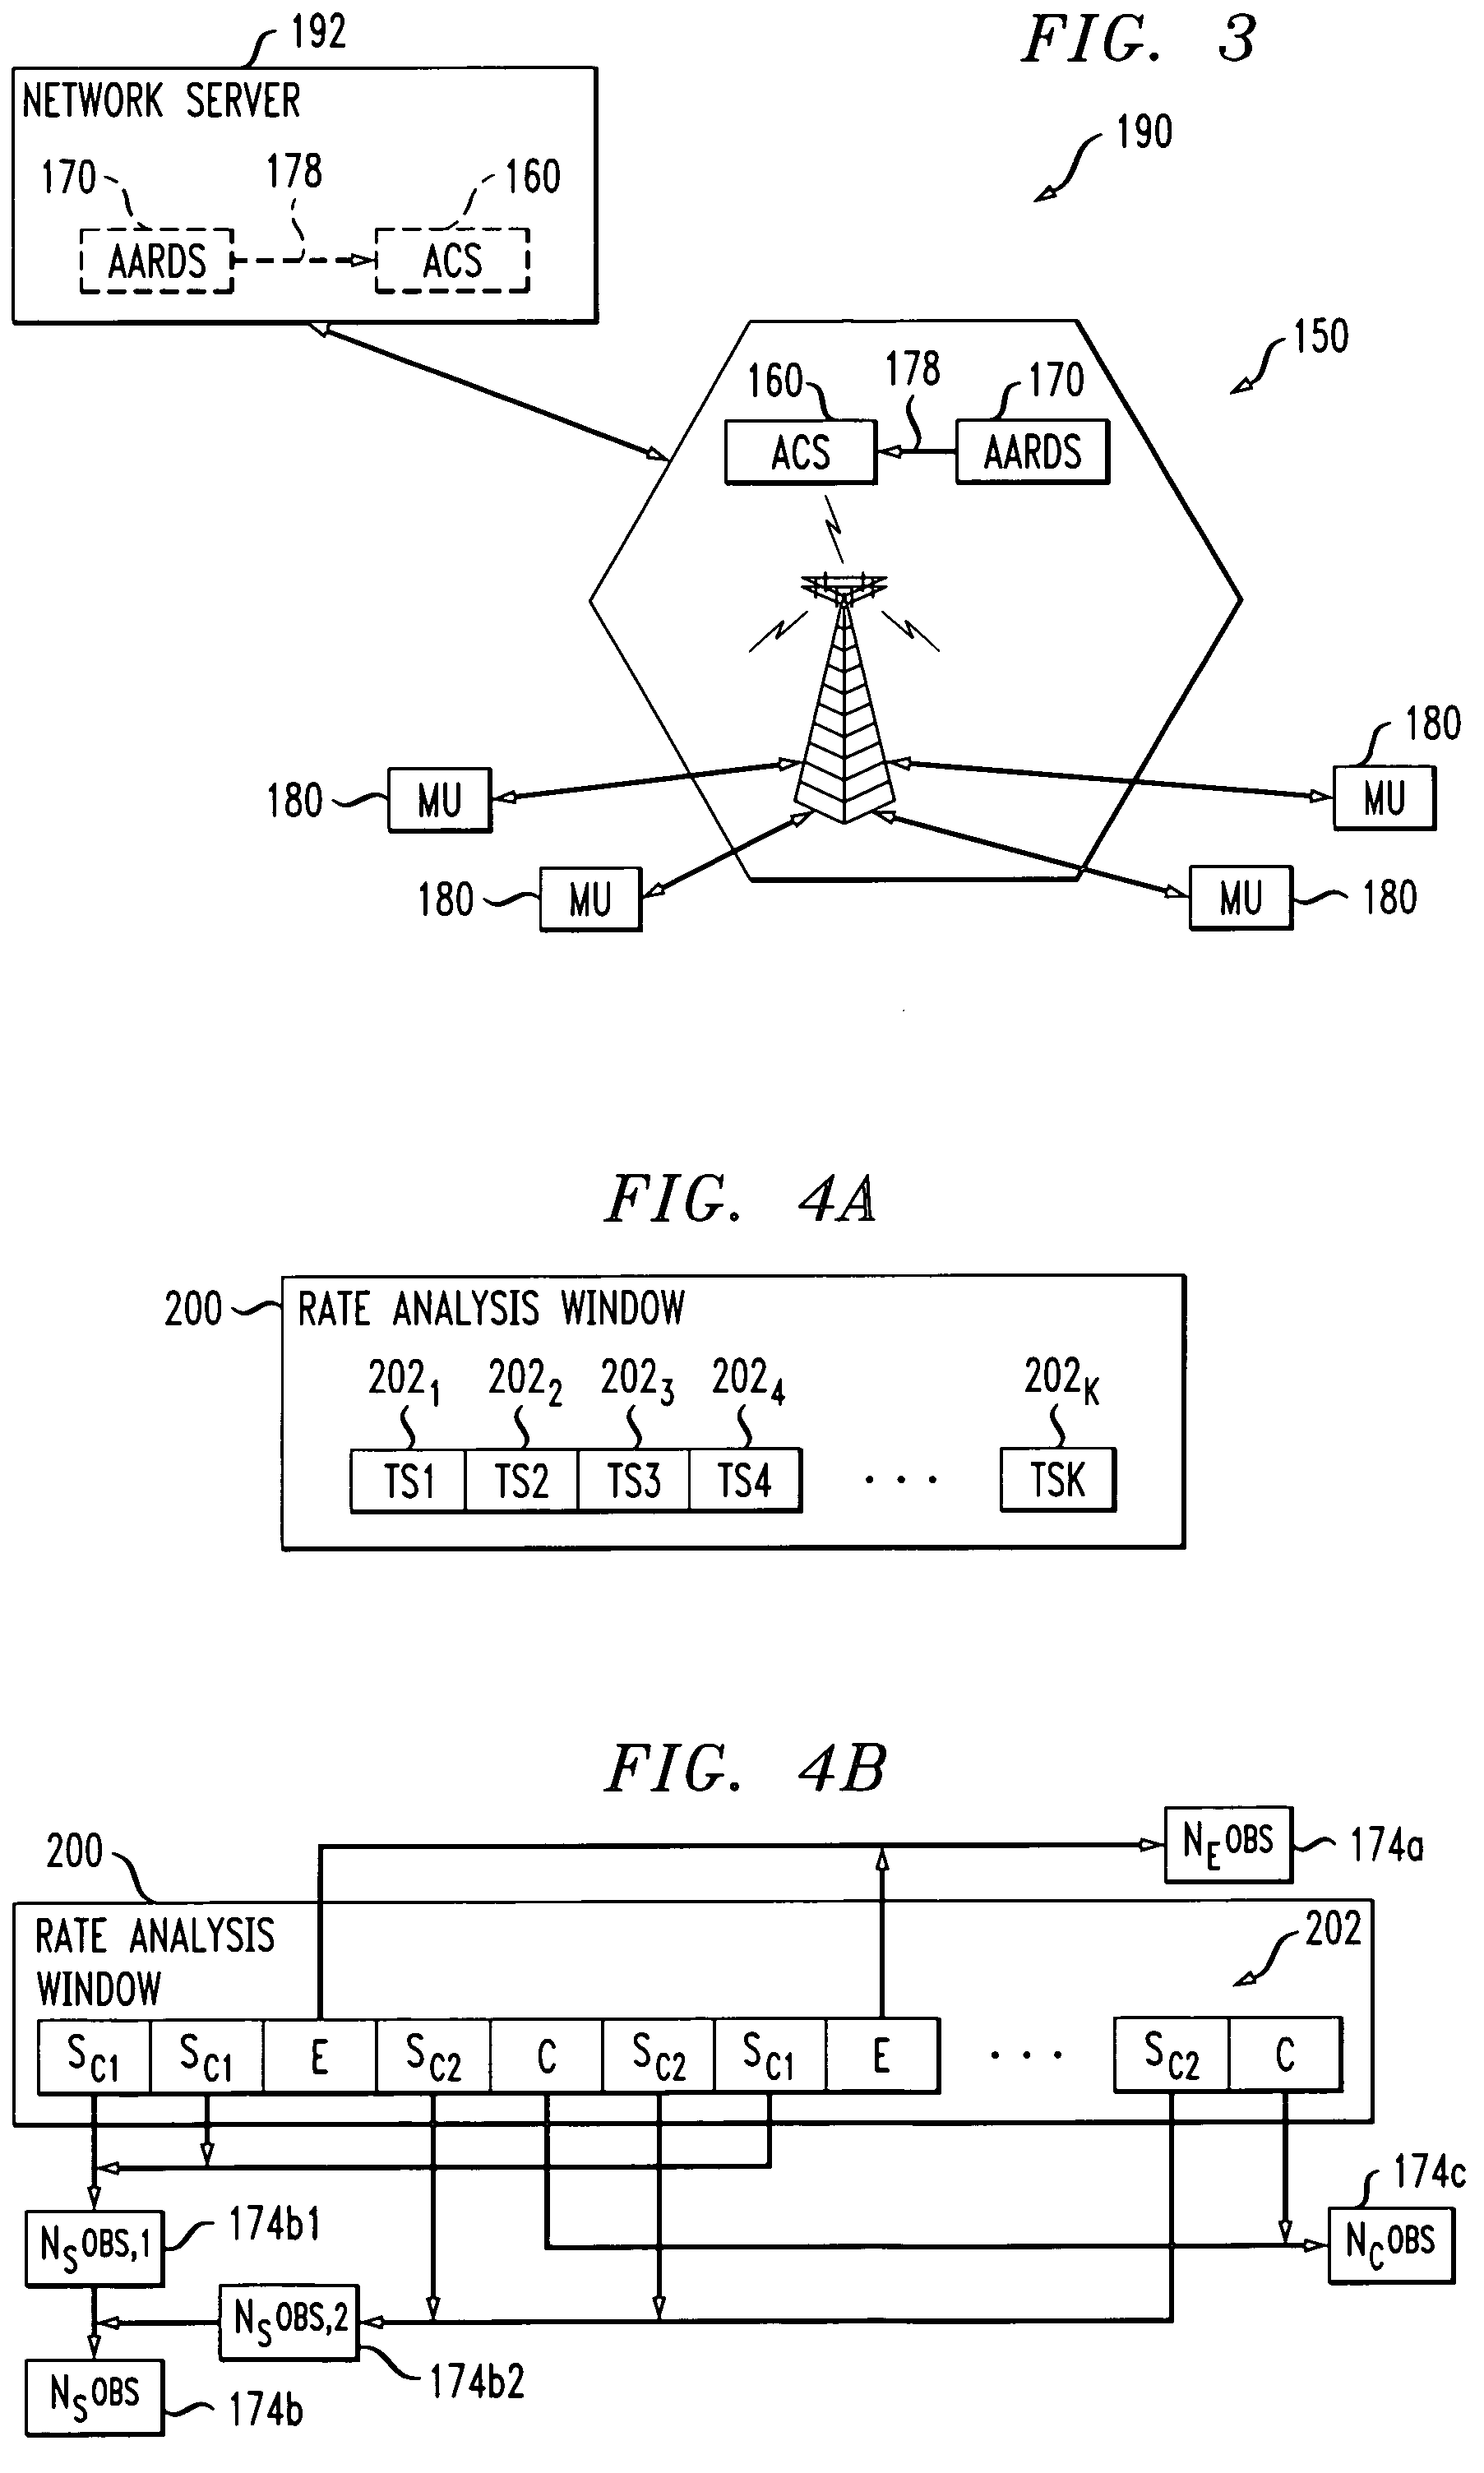 Methods and systems for estimating access/utilization attempt rates for resources of contention across single or multiple classes of devices